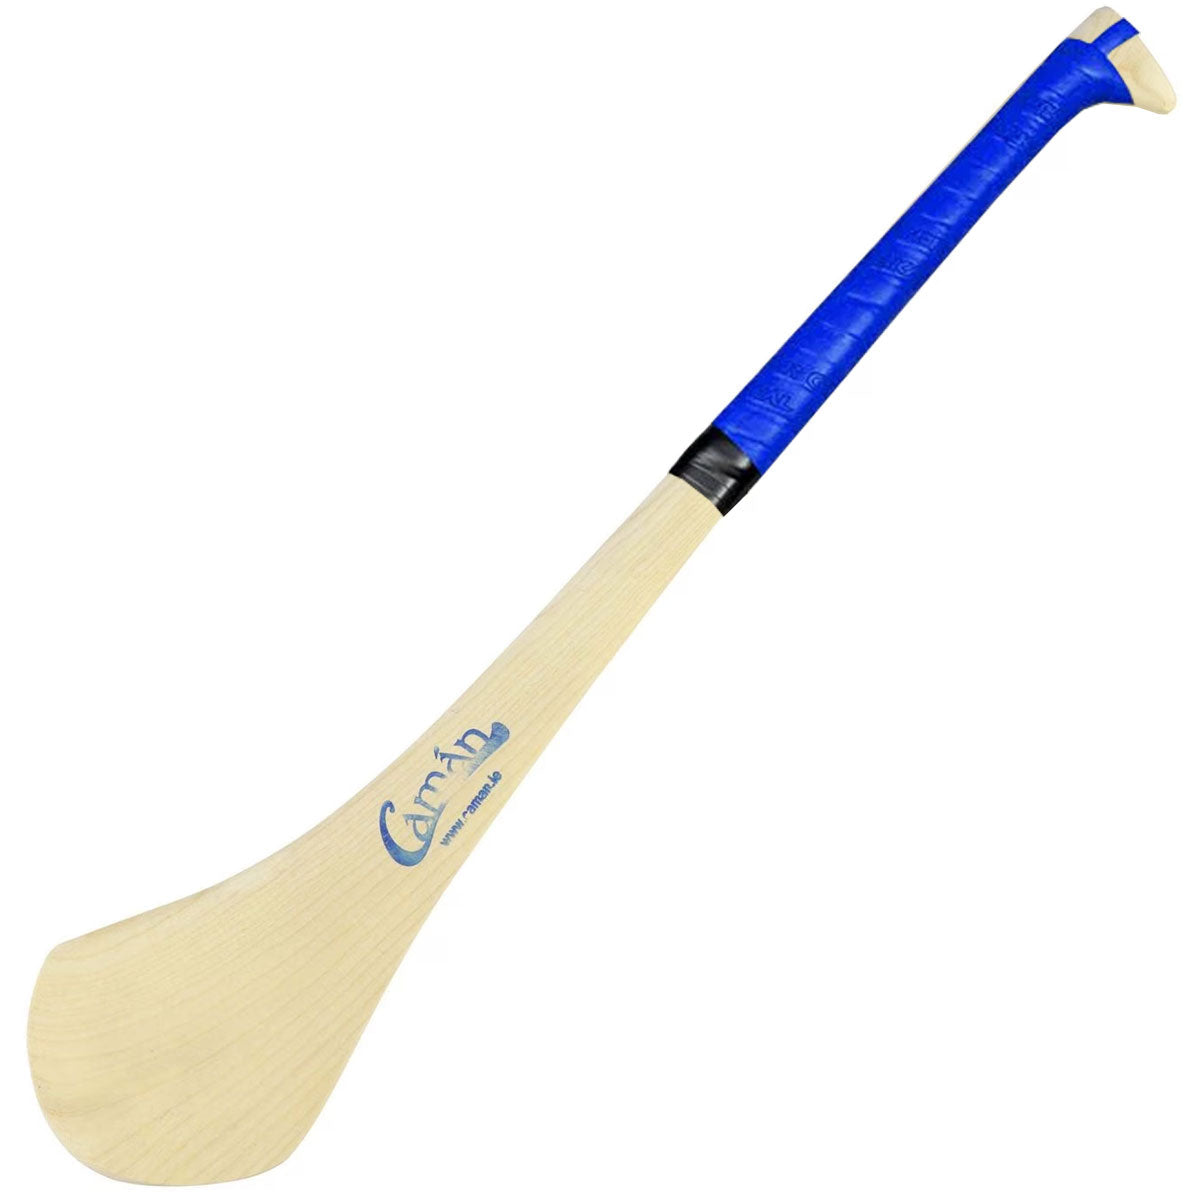 Caman Hurling Stick size 20 (Inches)